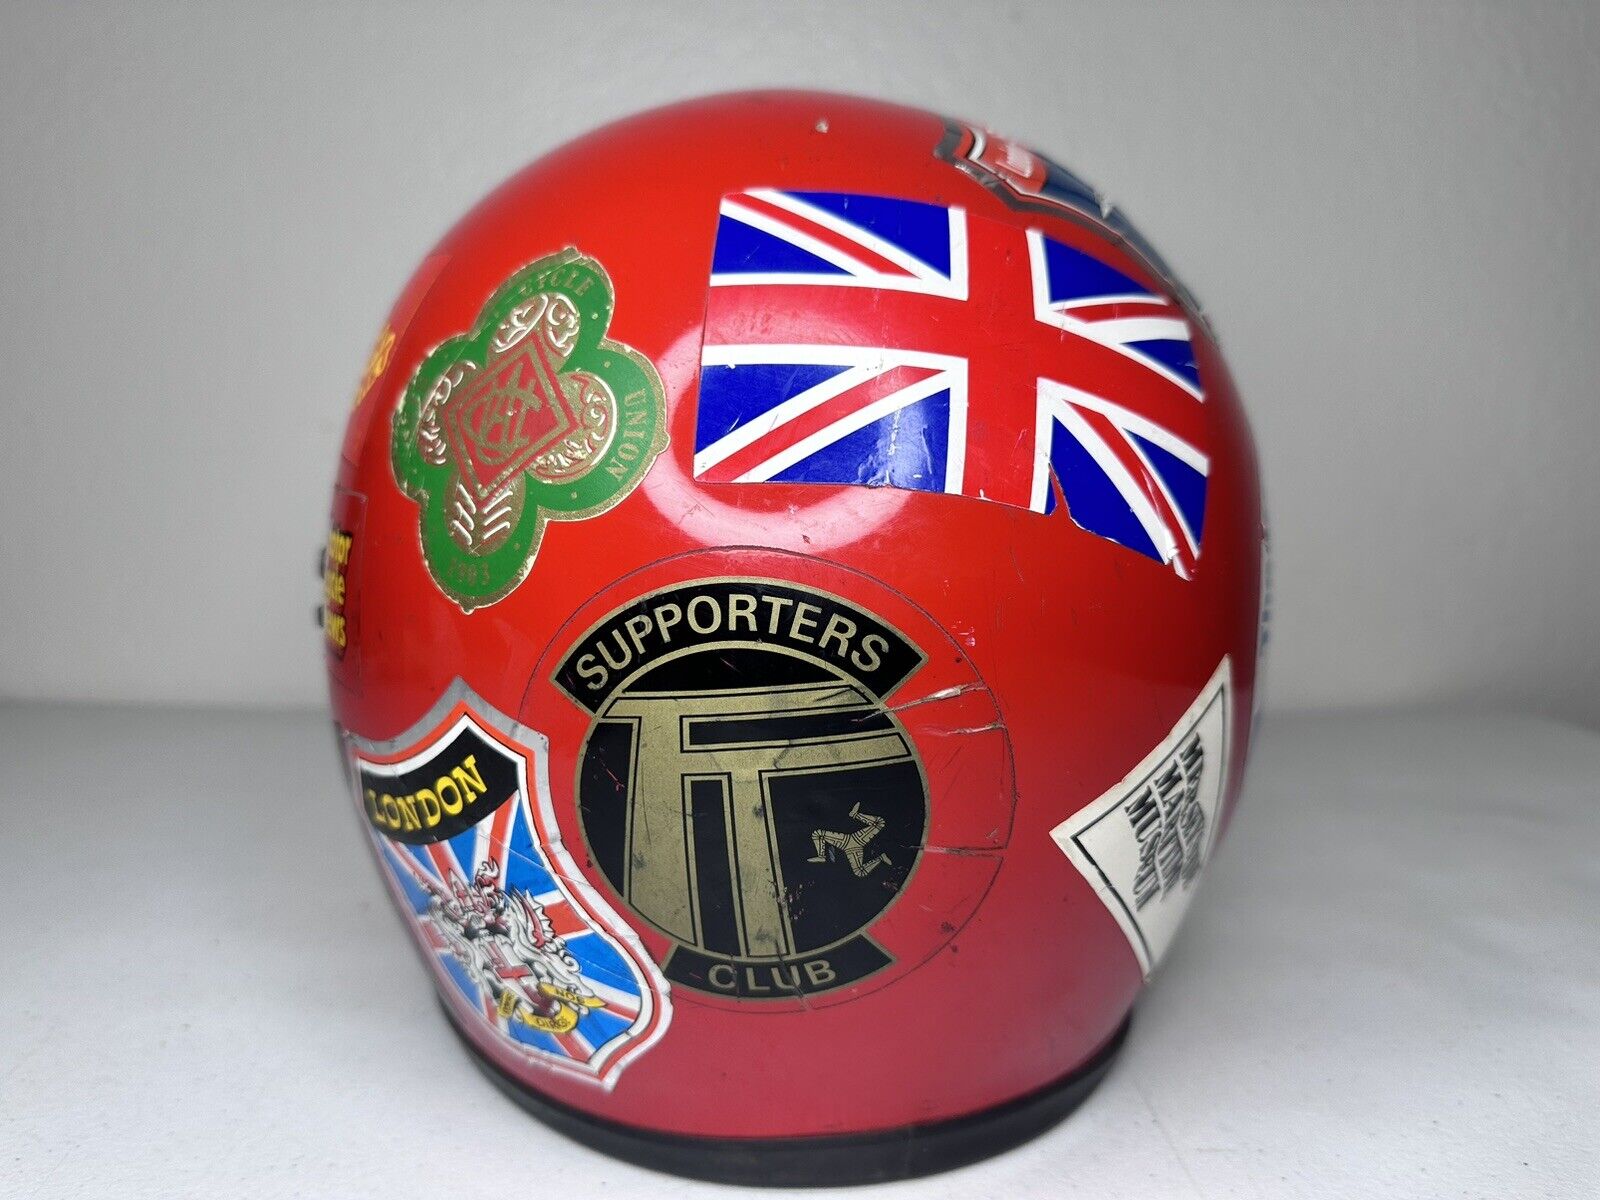 Vintage 1980s Shoei Racing Motorcycle Helmet - Red, Stickered Collectible (Size 7 1/8 - 7 1/4) - TreasuTiques